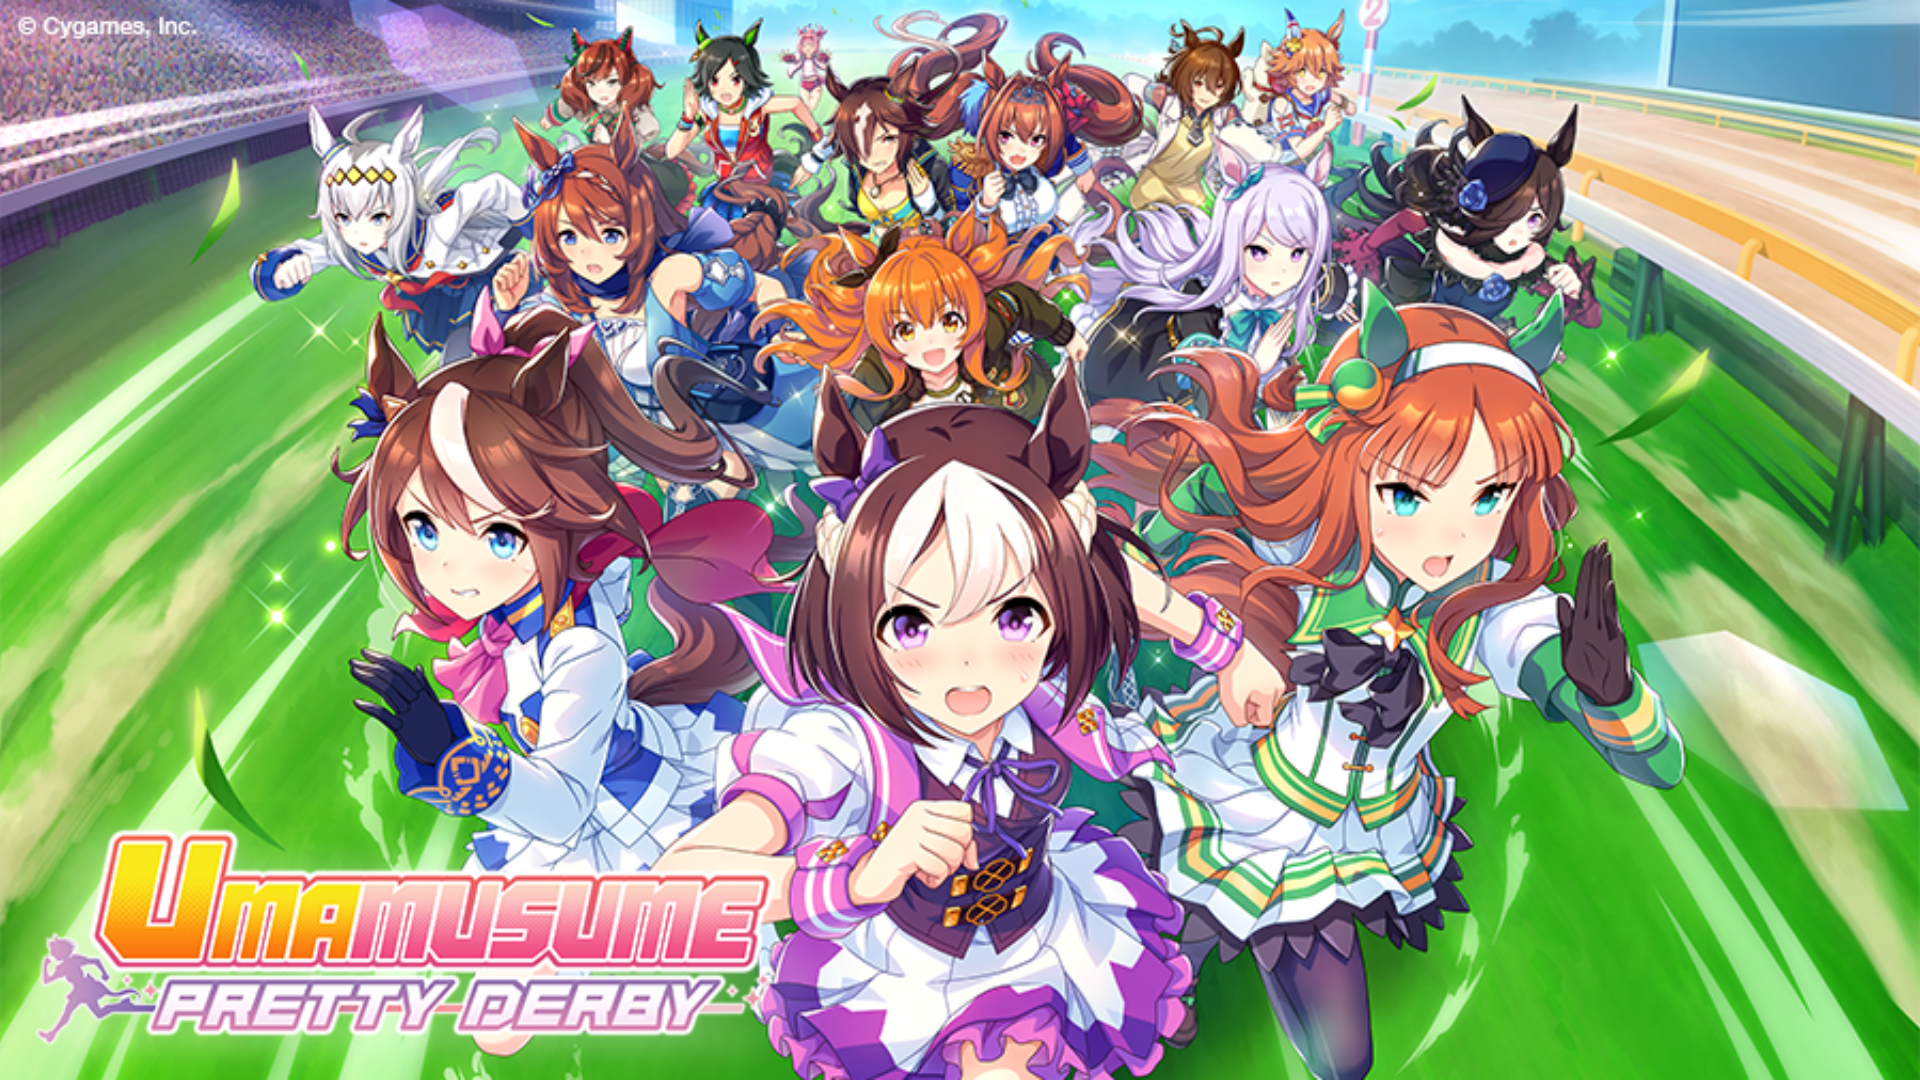 Umamusume: Pretty Derby's English debut is on its way! Follow us for the latest news and updates!